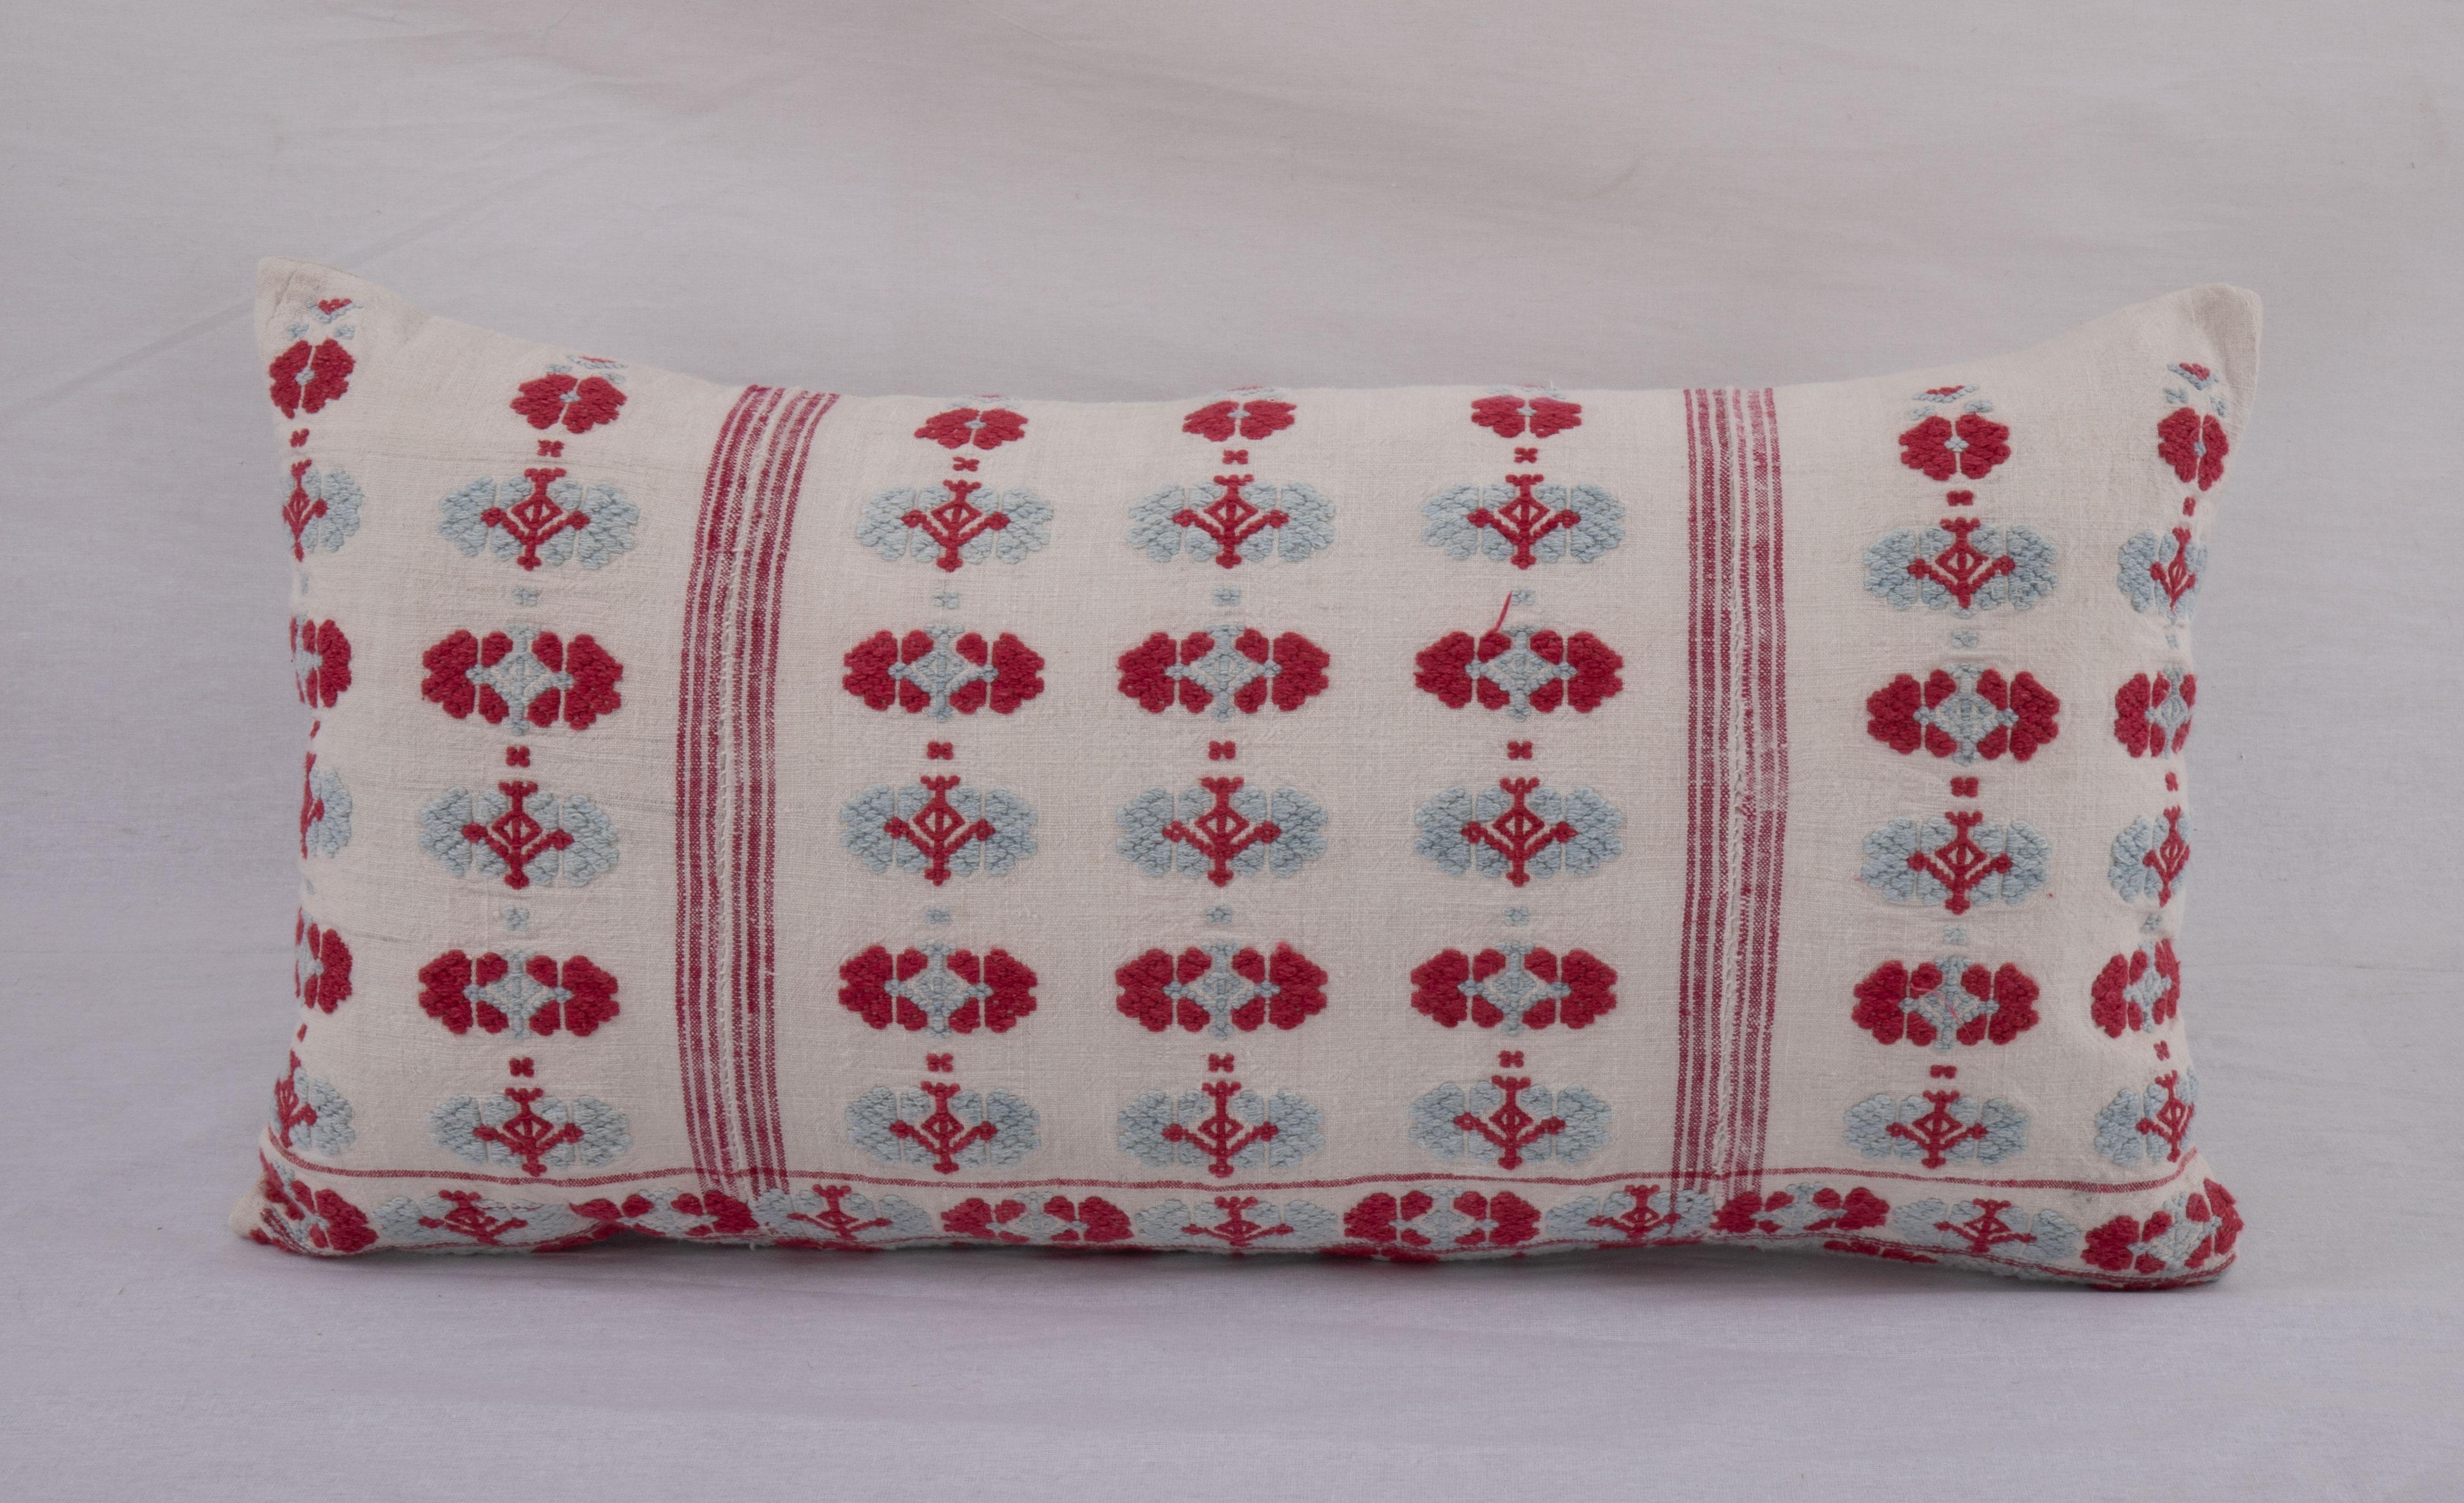 The pillow case has been fashioned from a Western Anatolian Cotton embroidered dress skirt.
It does not come with an insert but a bag made from cotton fabric to accommodate insert materials.
Linen in the back.
Zipper closure.
Dry Cleaning